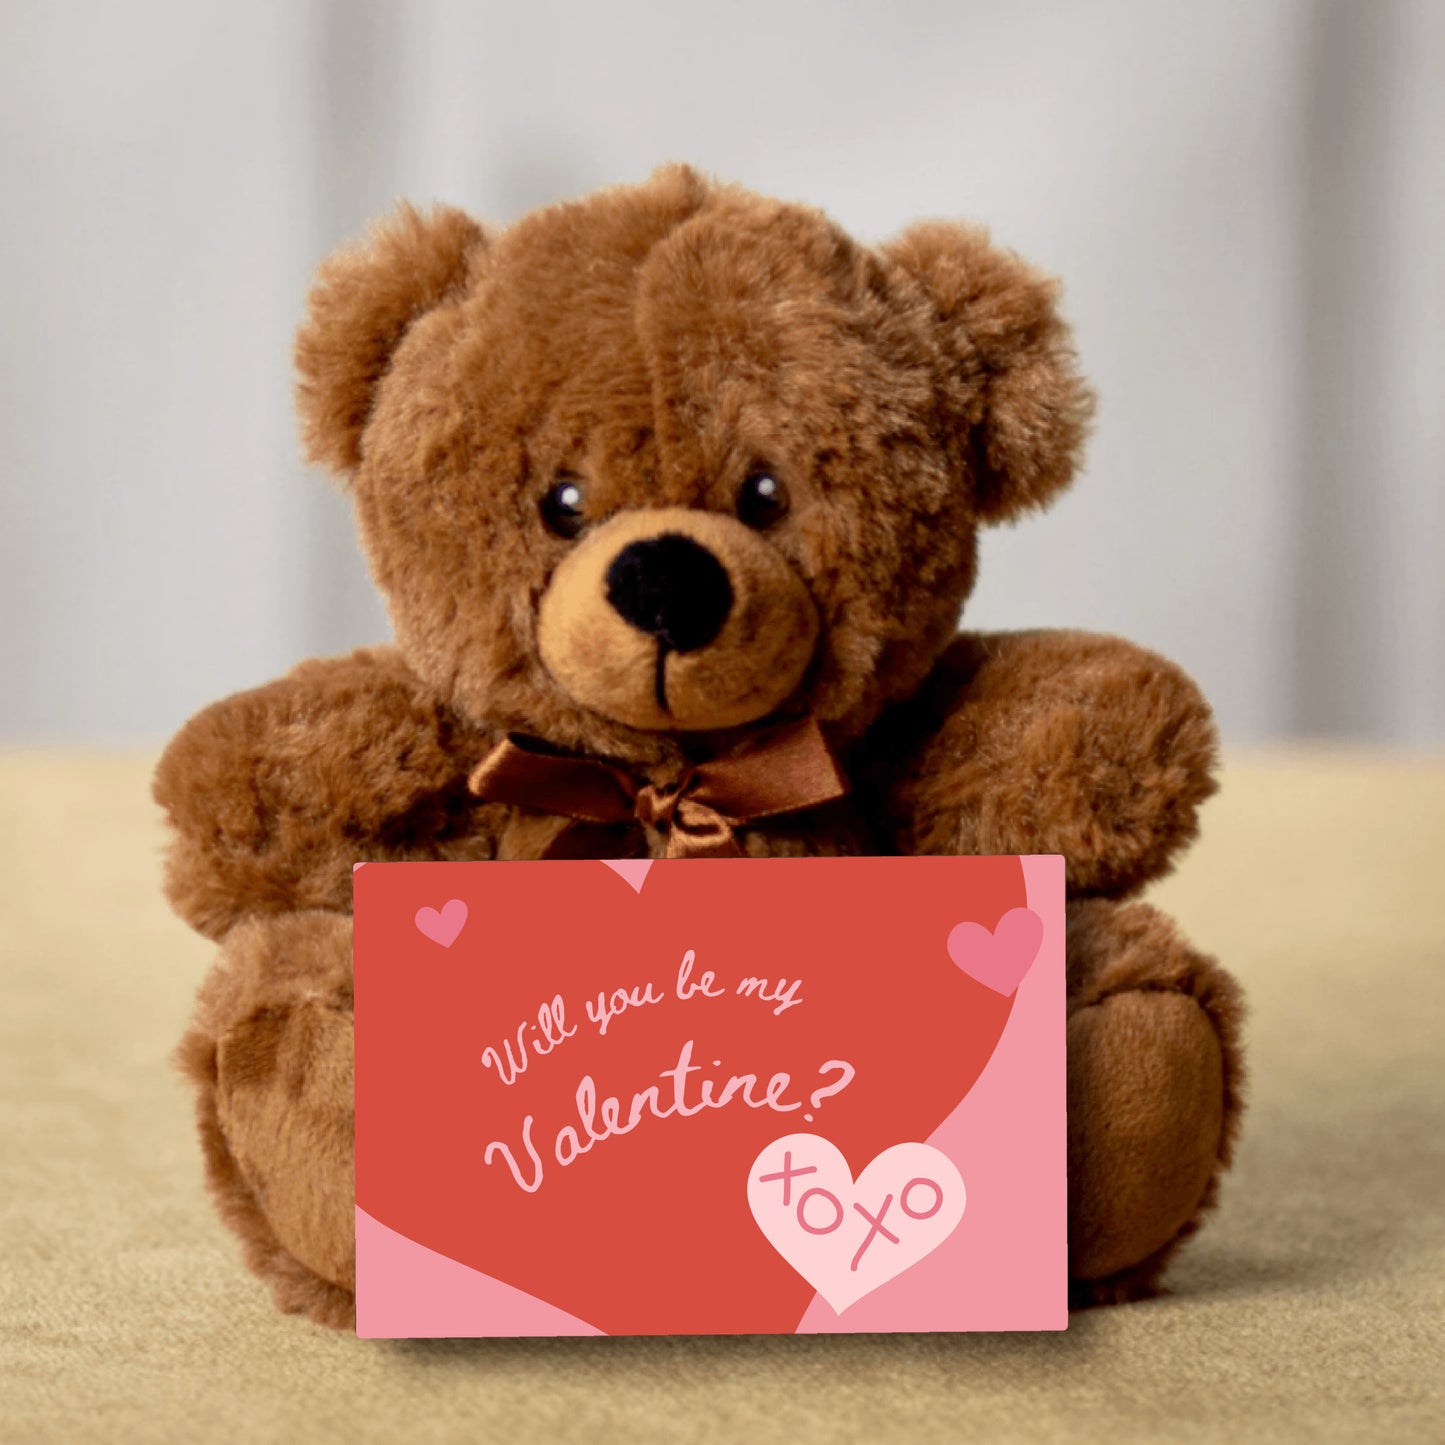 Will you be my Valentine Teddy Bear FREE SHIPPING